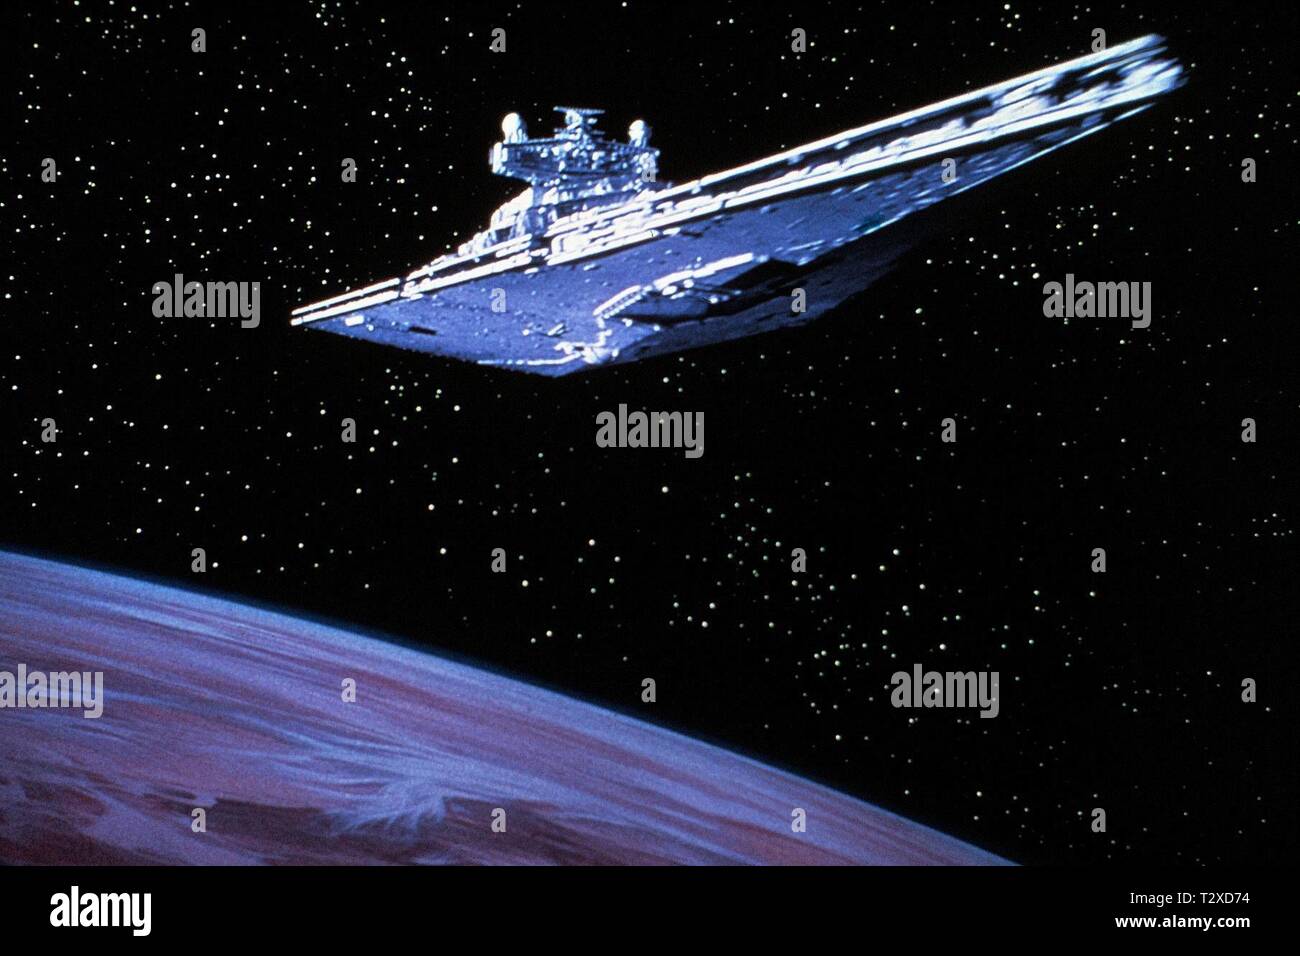 STAR DESTROYER, STAR WARS: EPISODE IV - A NEW HOPE, 1977 Stock Photo